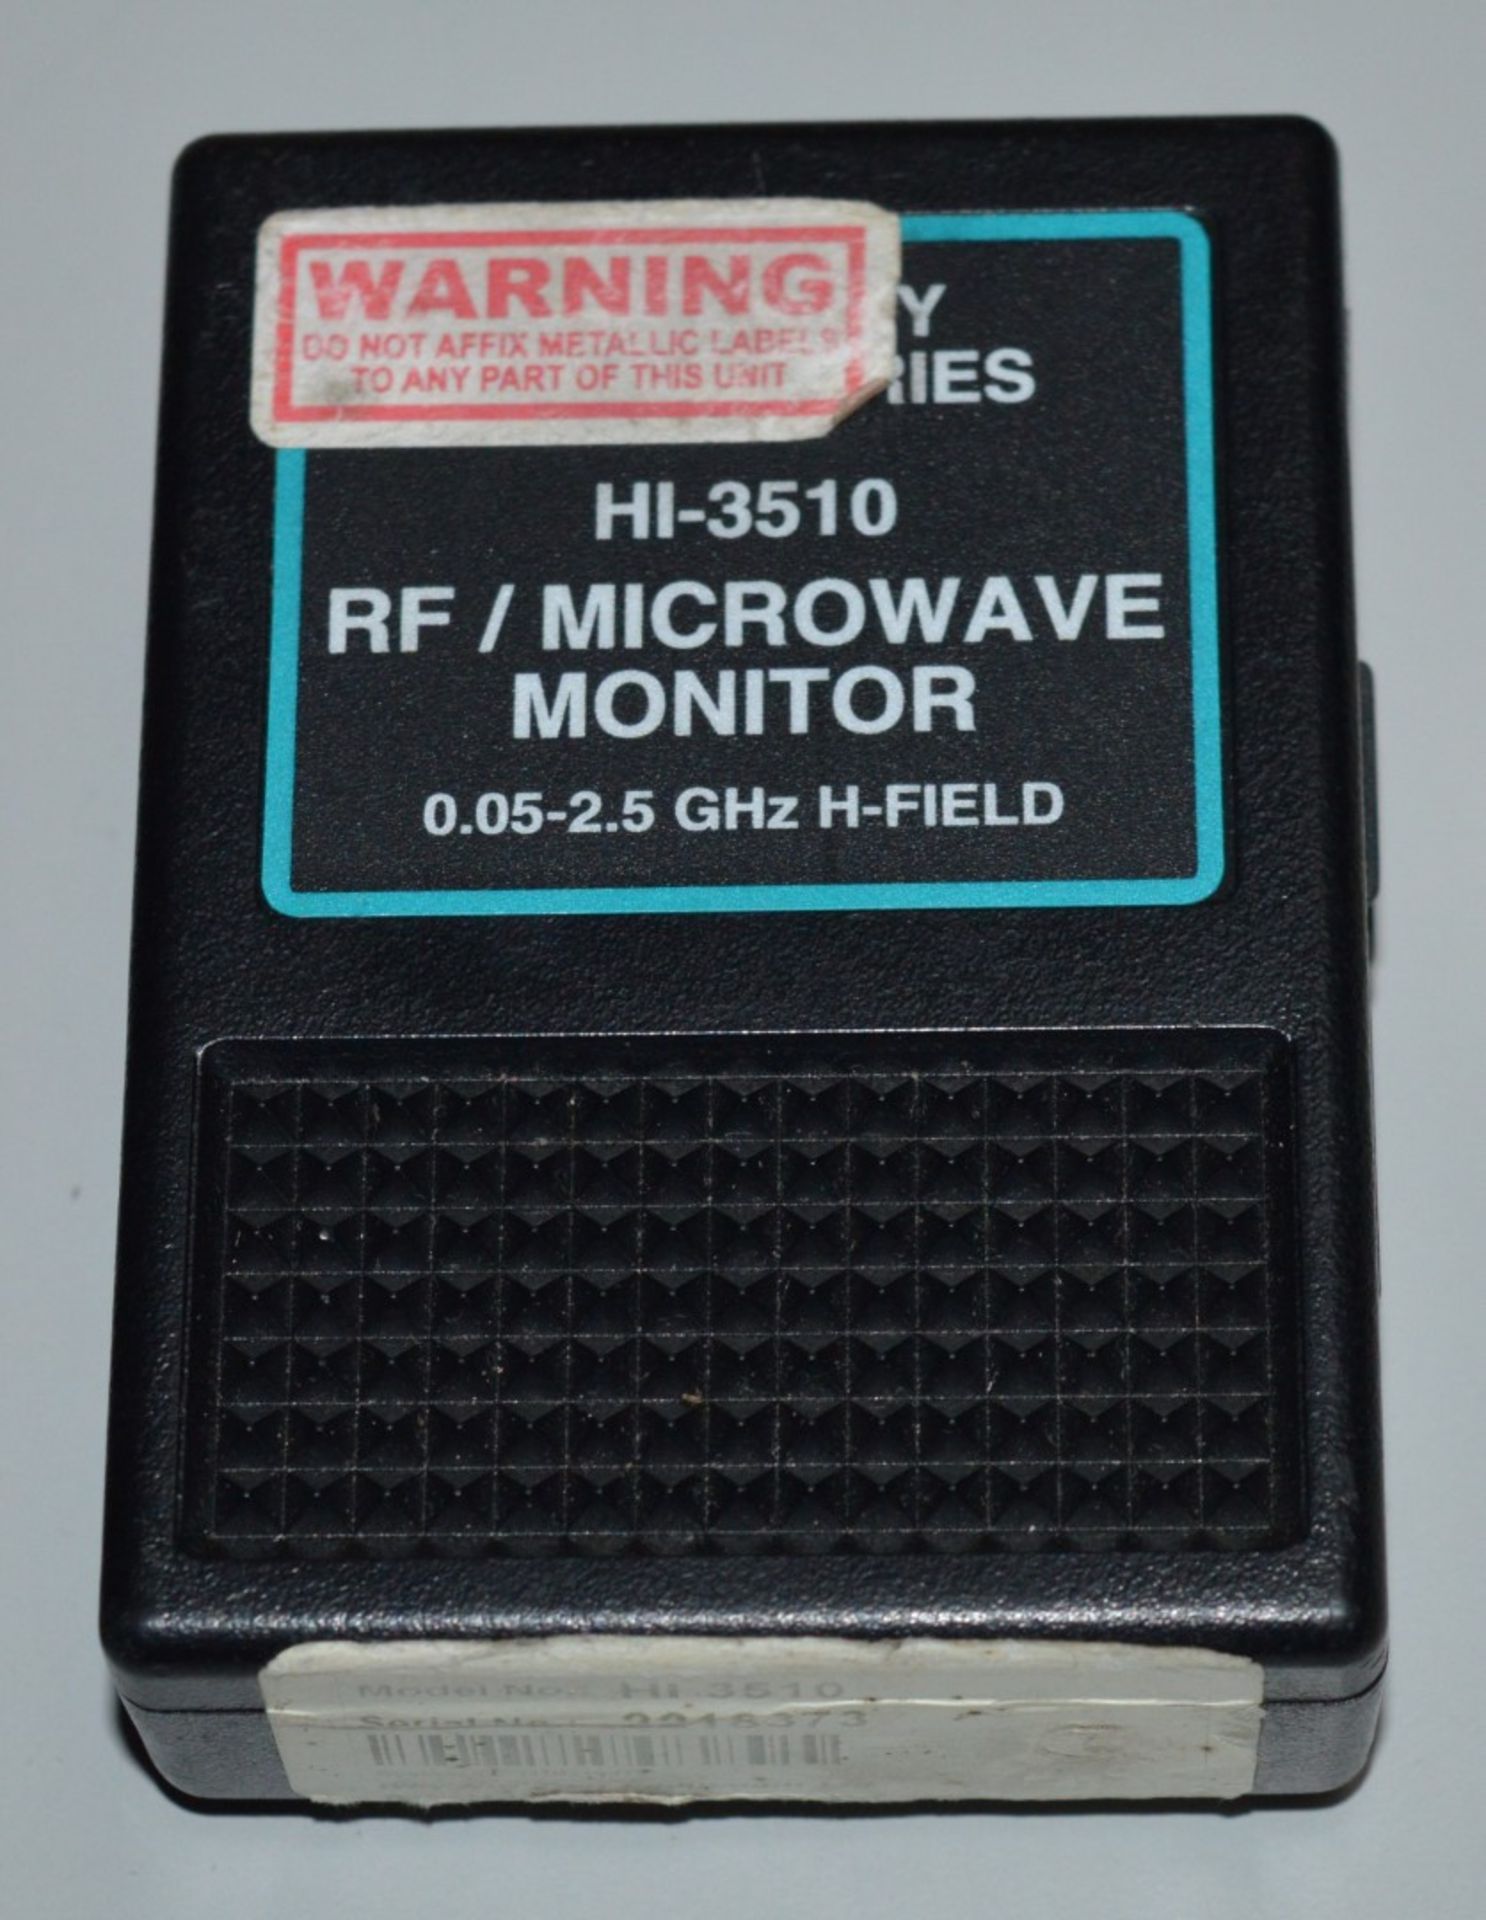 1 x Holaday Industries HI-3510 RF Microwave Monitor - 0.05 - 2.5ghz H-Field - Small Pocket Sized - Image 3 of 3